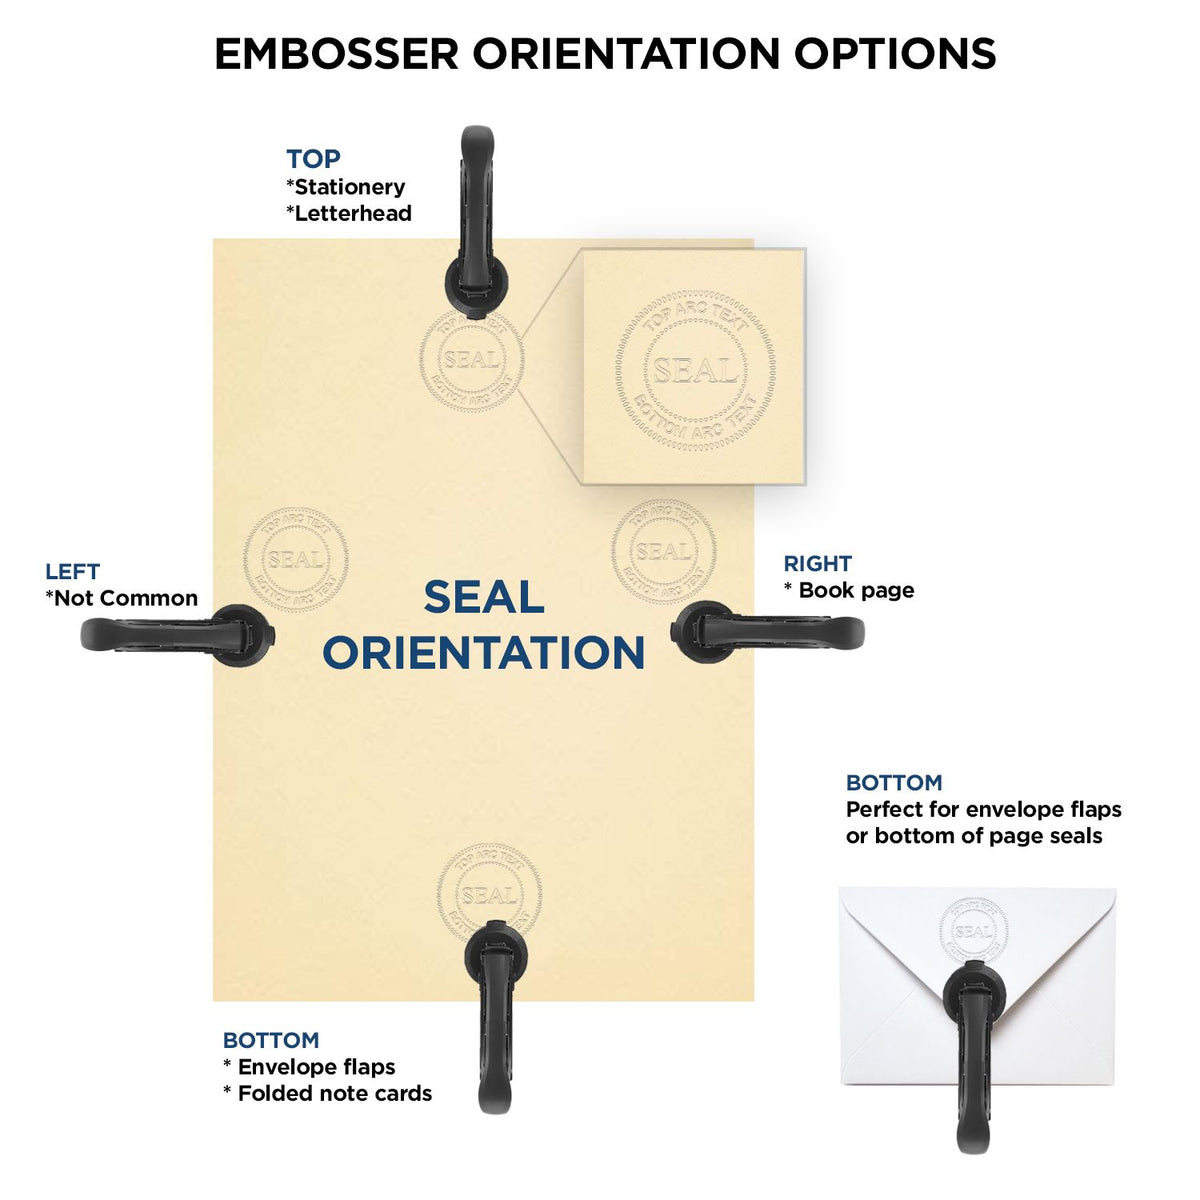 An infographic for the Oklahoma Engineer Desk Seal showing embosser orientation, this is showing examples of a top, bottom, right and left insert.